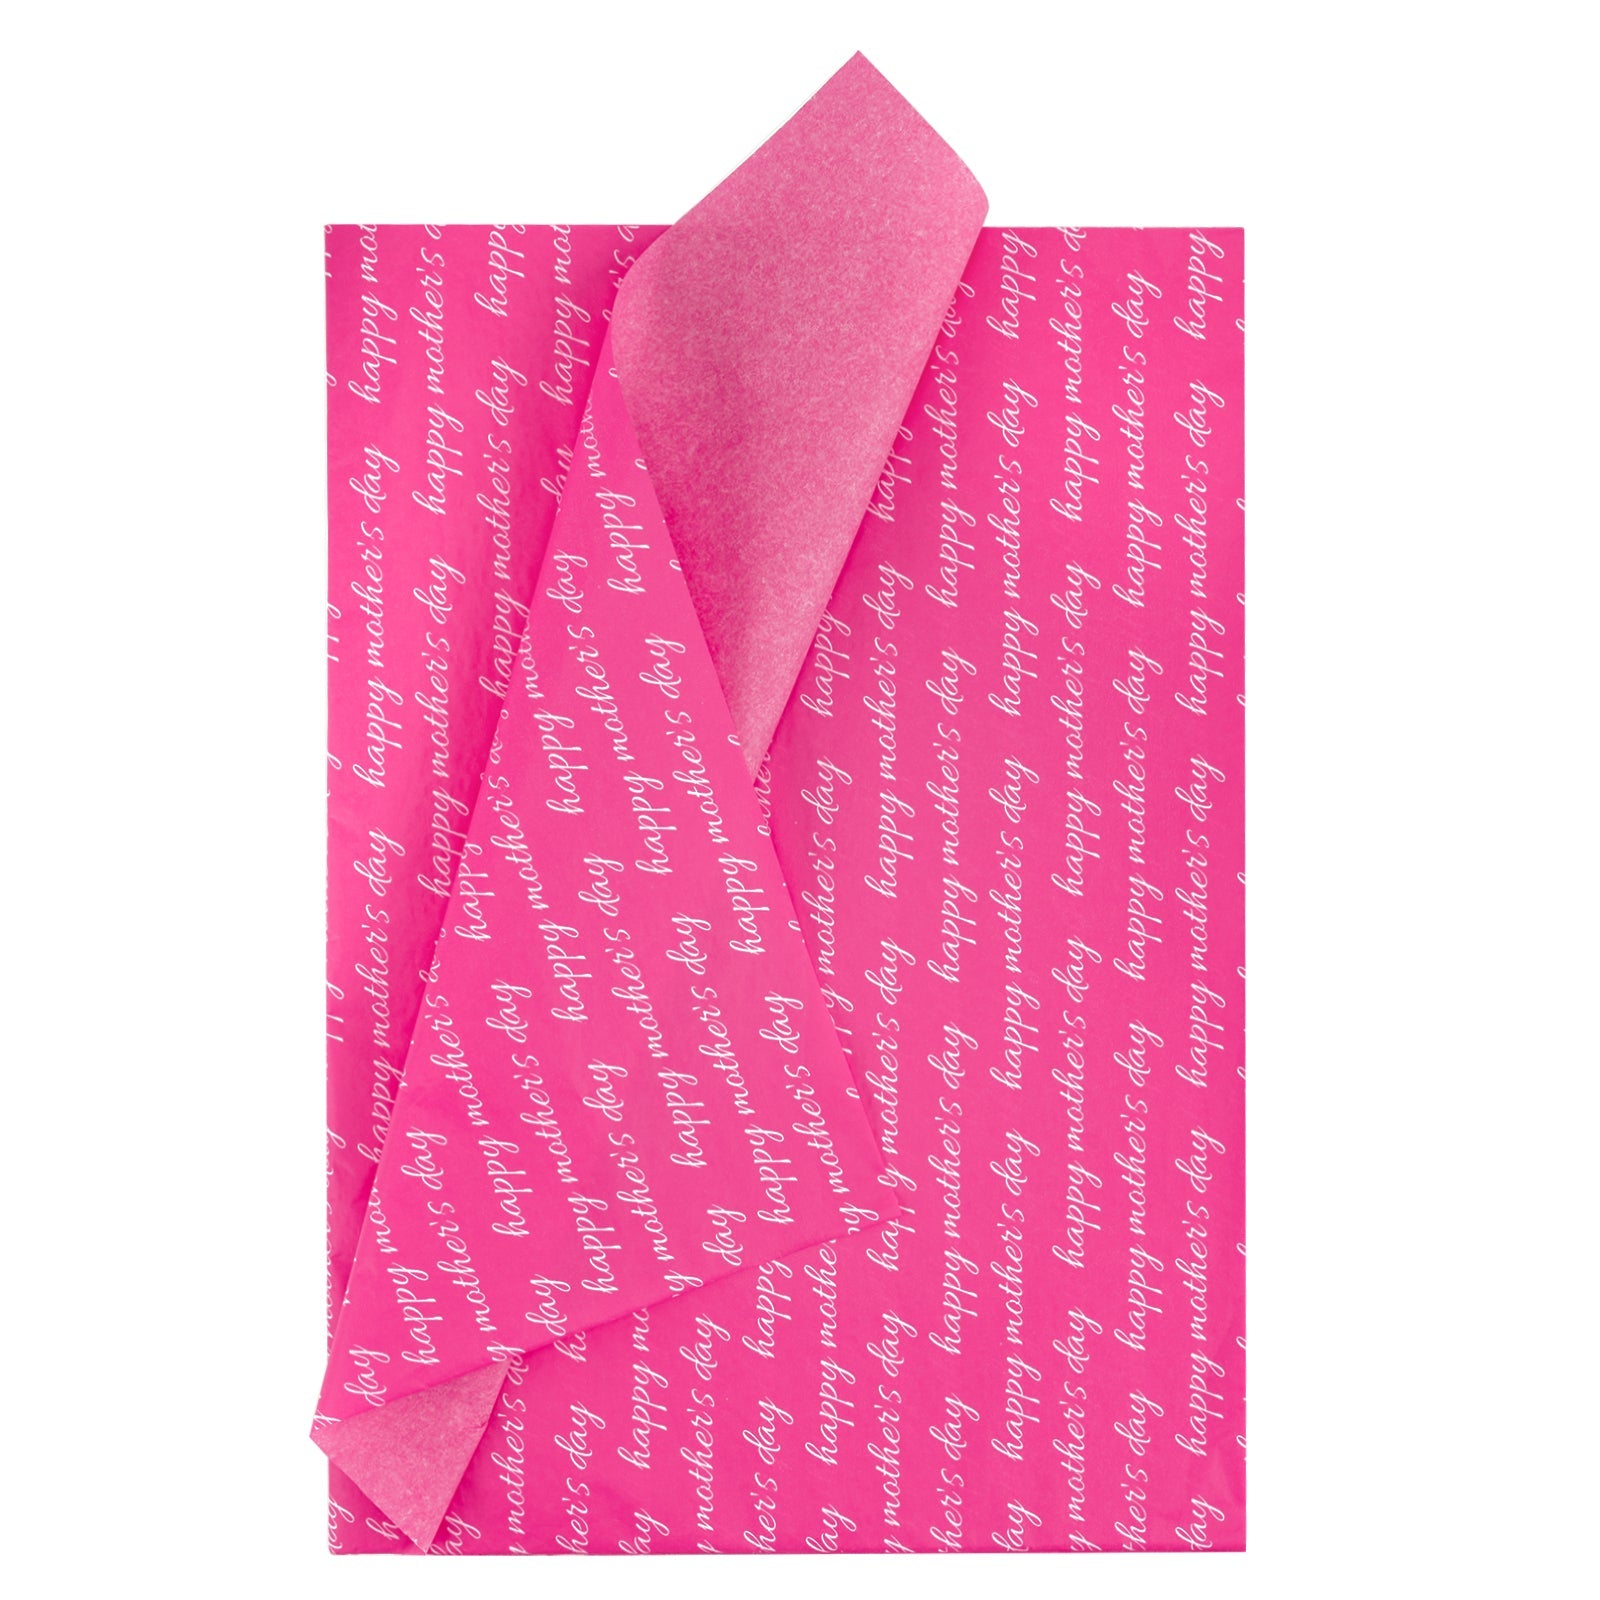 Pretty in Pink Gift Wrap Tissue Paper, 60 sheets (20